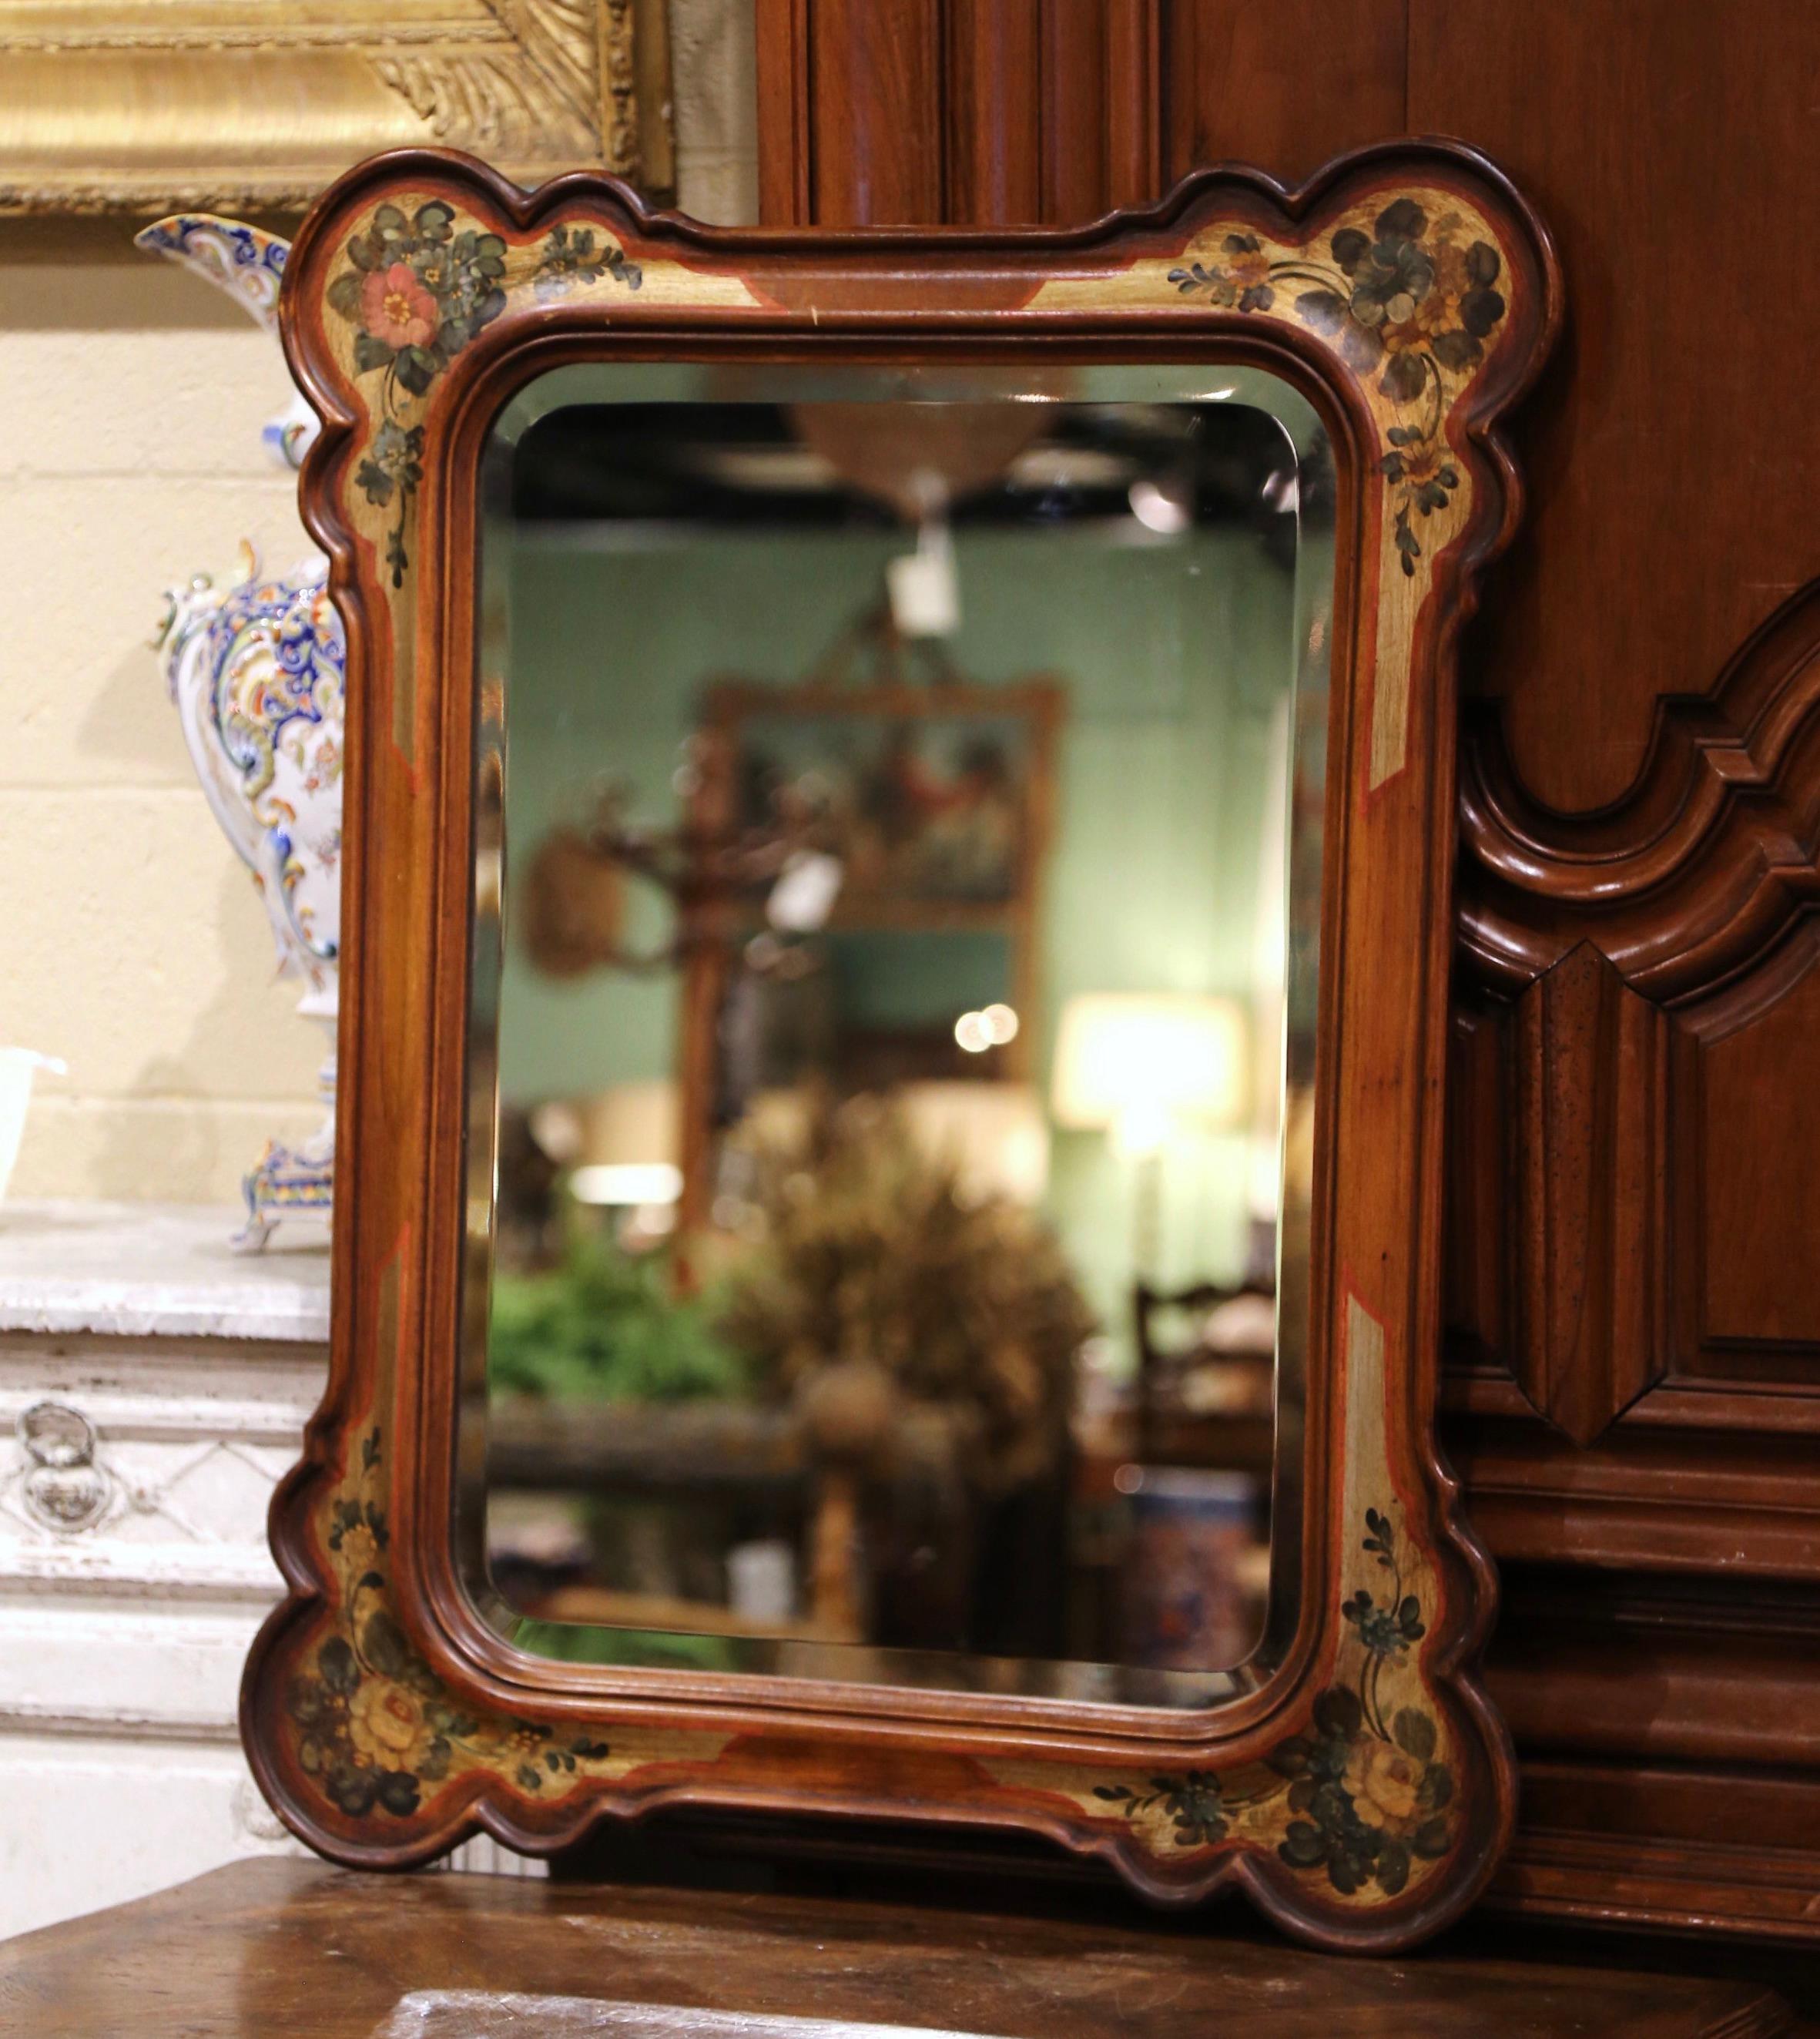 Decorate a powder room or a girl's bedroom with this elegant antique mirror. Crafted in Italy circa 1970 and rectangular in shape with rounded corners, the colorful carved mirror features a scrolled molding around the frame. The frame is embellished